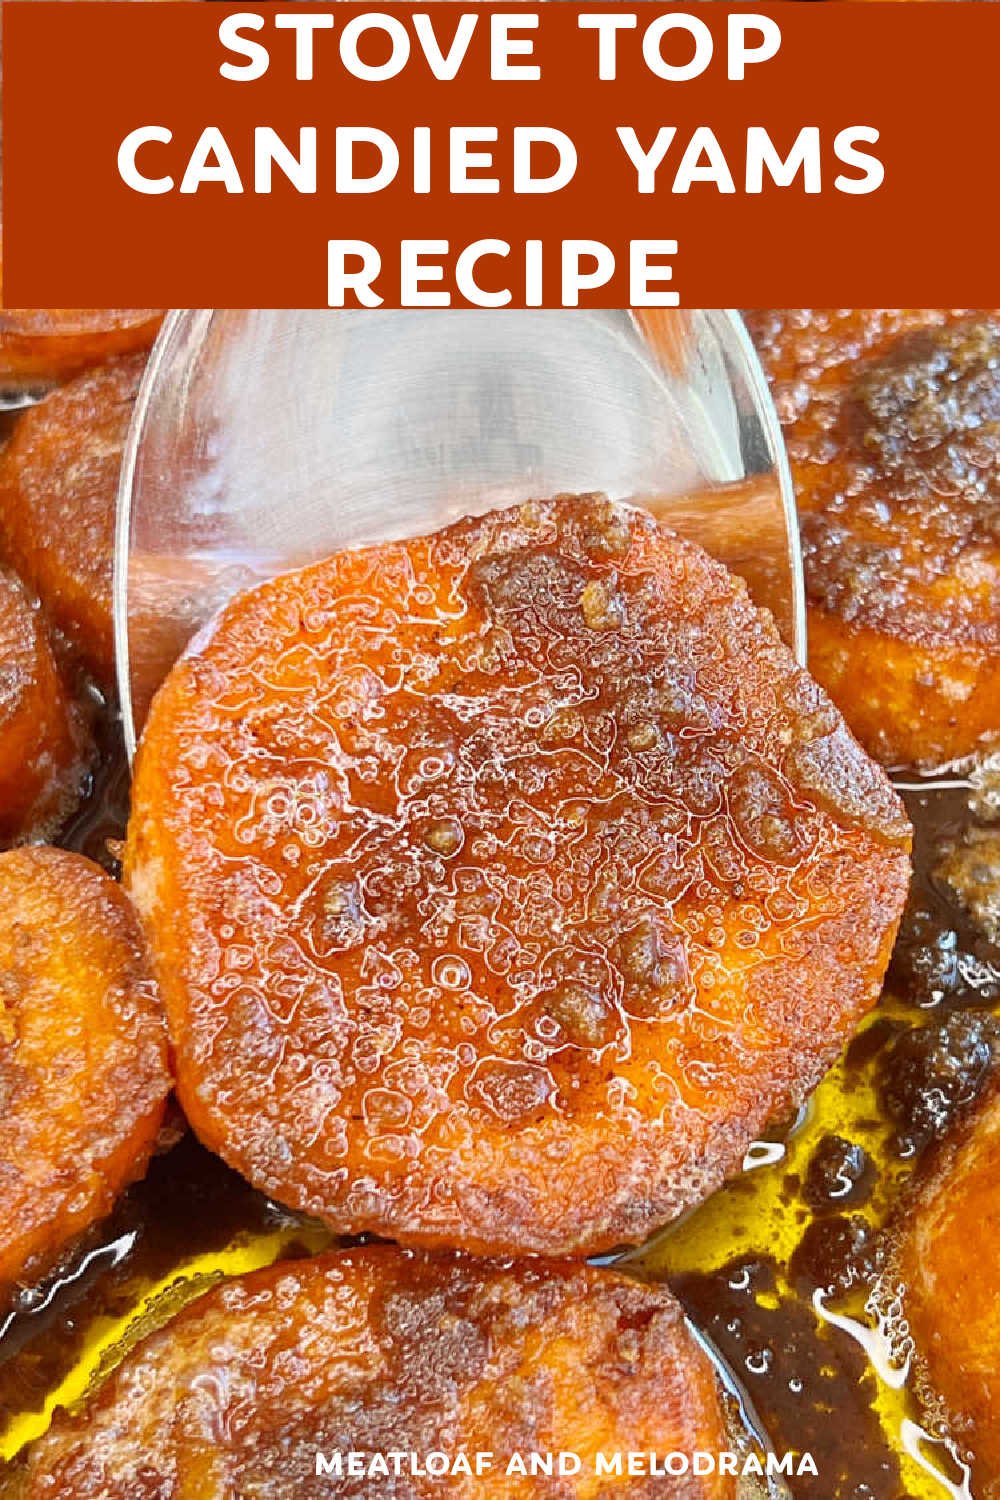 Easy Stove Top Candied Yams made with butter, brown sugar and cinnamon are the perfect side dish for Thanksgiving dinner or any holiday meal. You'll love this traditional sweet potato recipe that tastes just like Grandma used to make! via @meamel